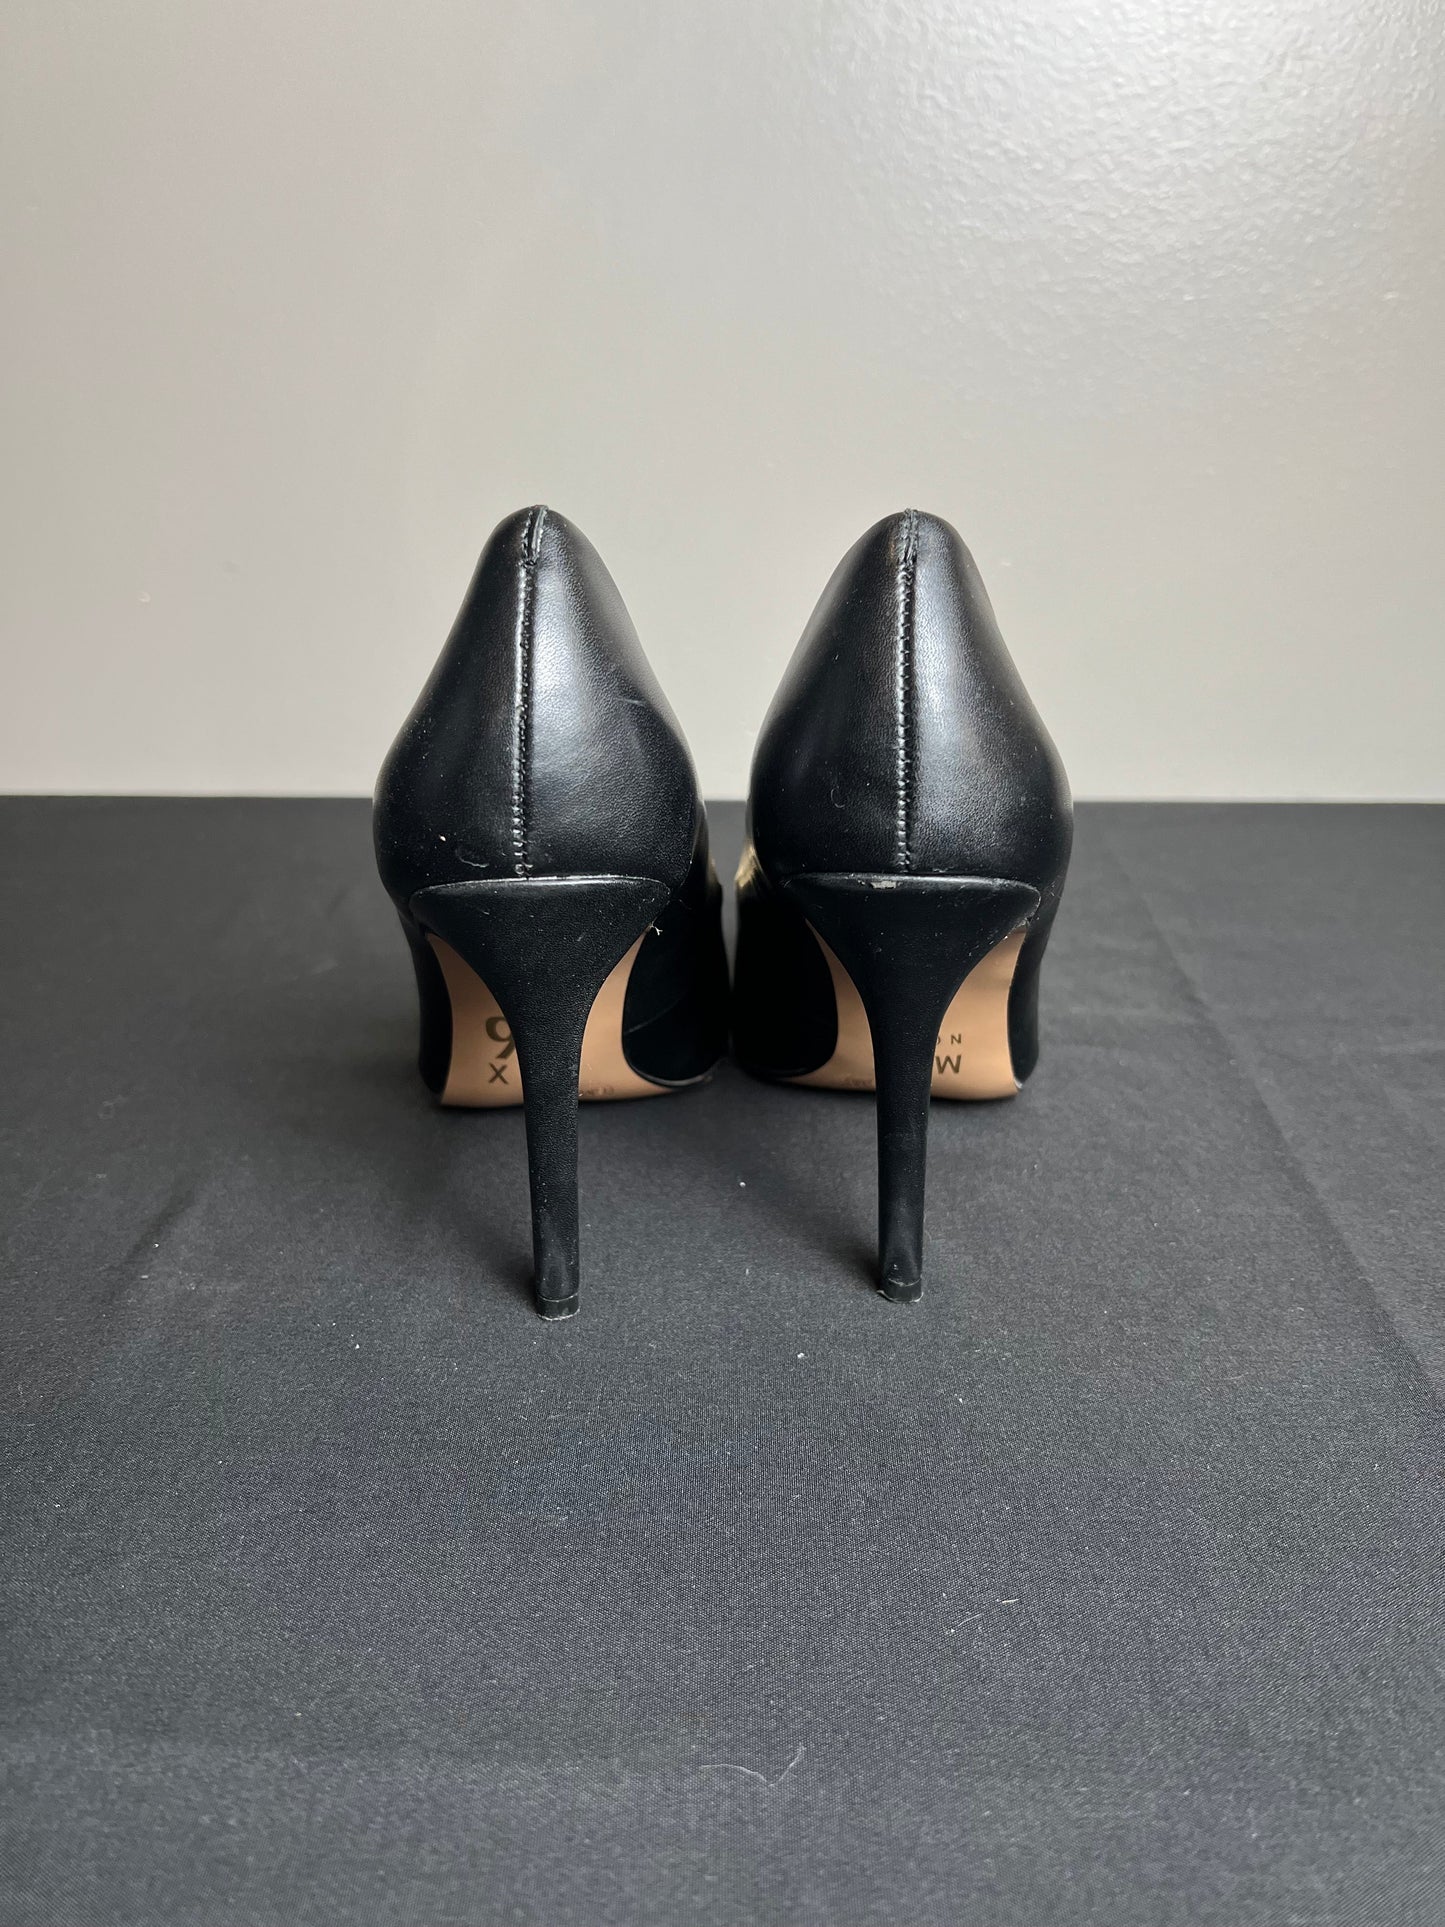 Shoes Heels Stiletto By Mix No 6  Size: 6